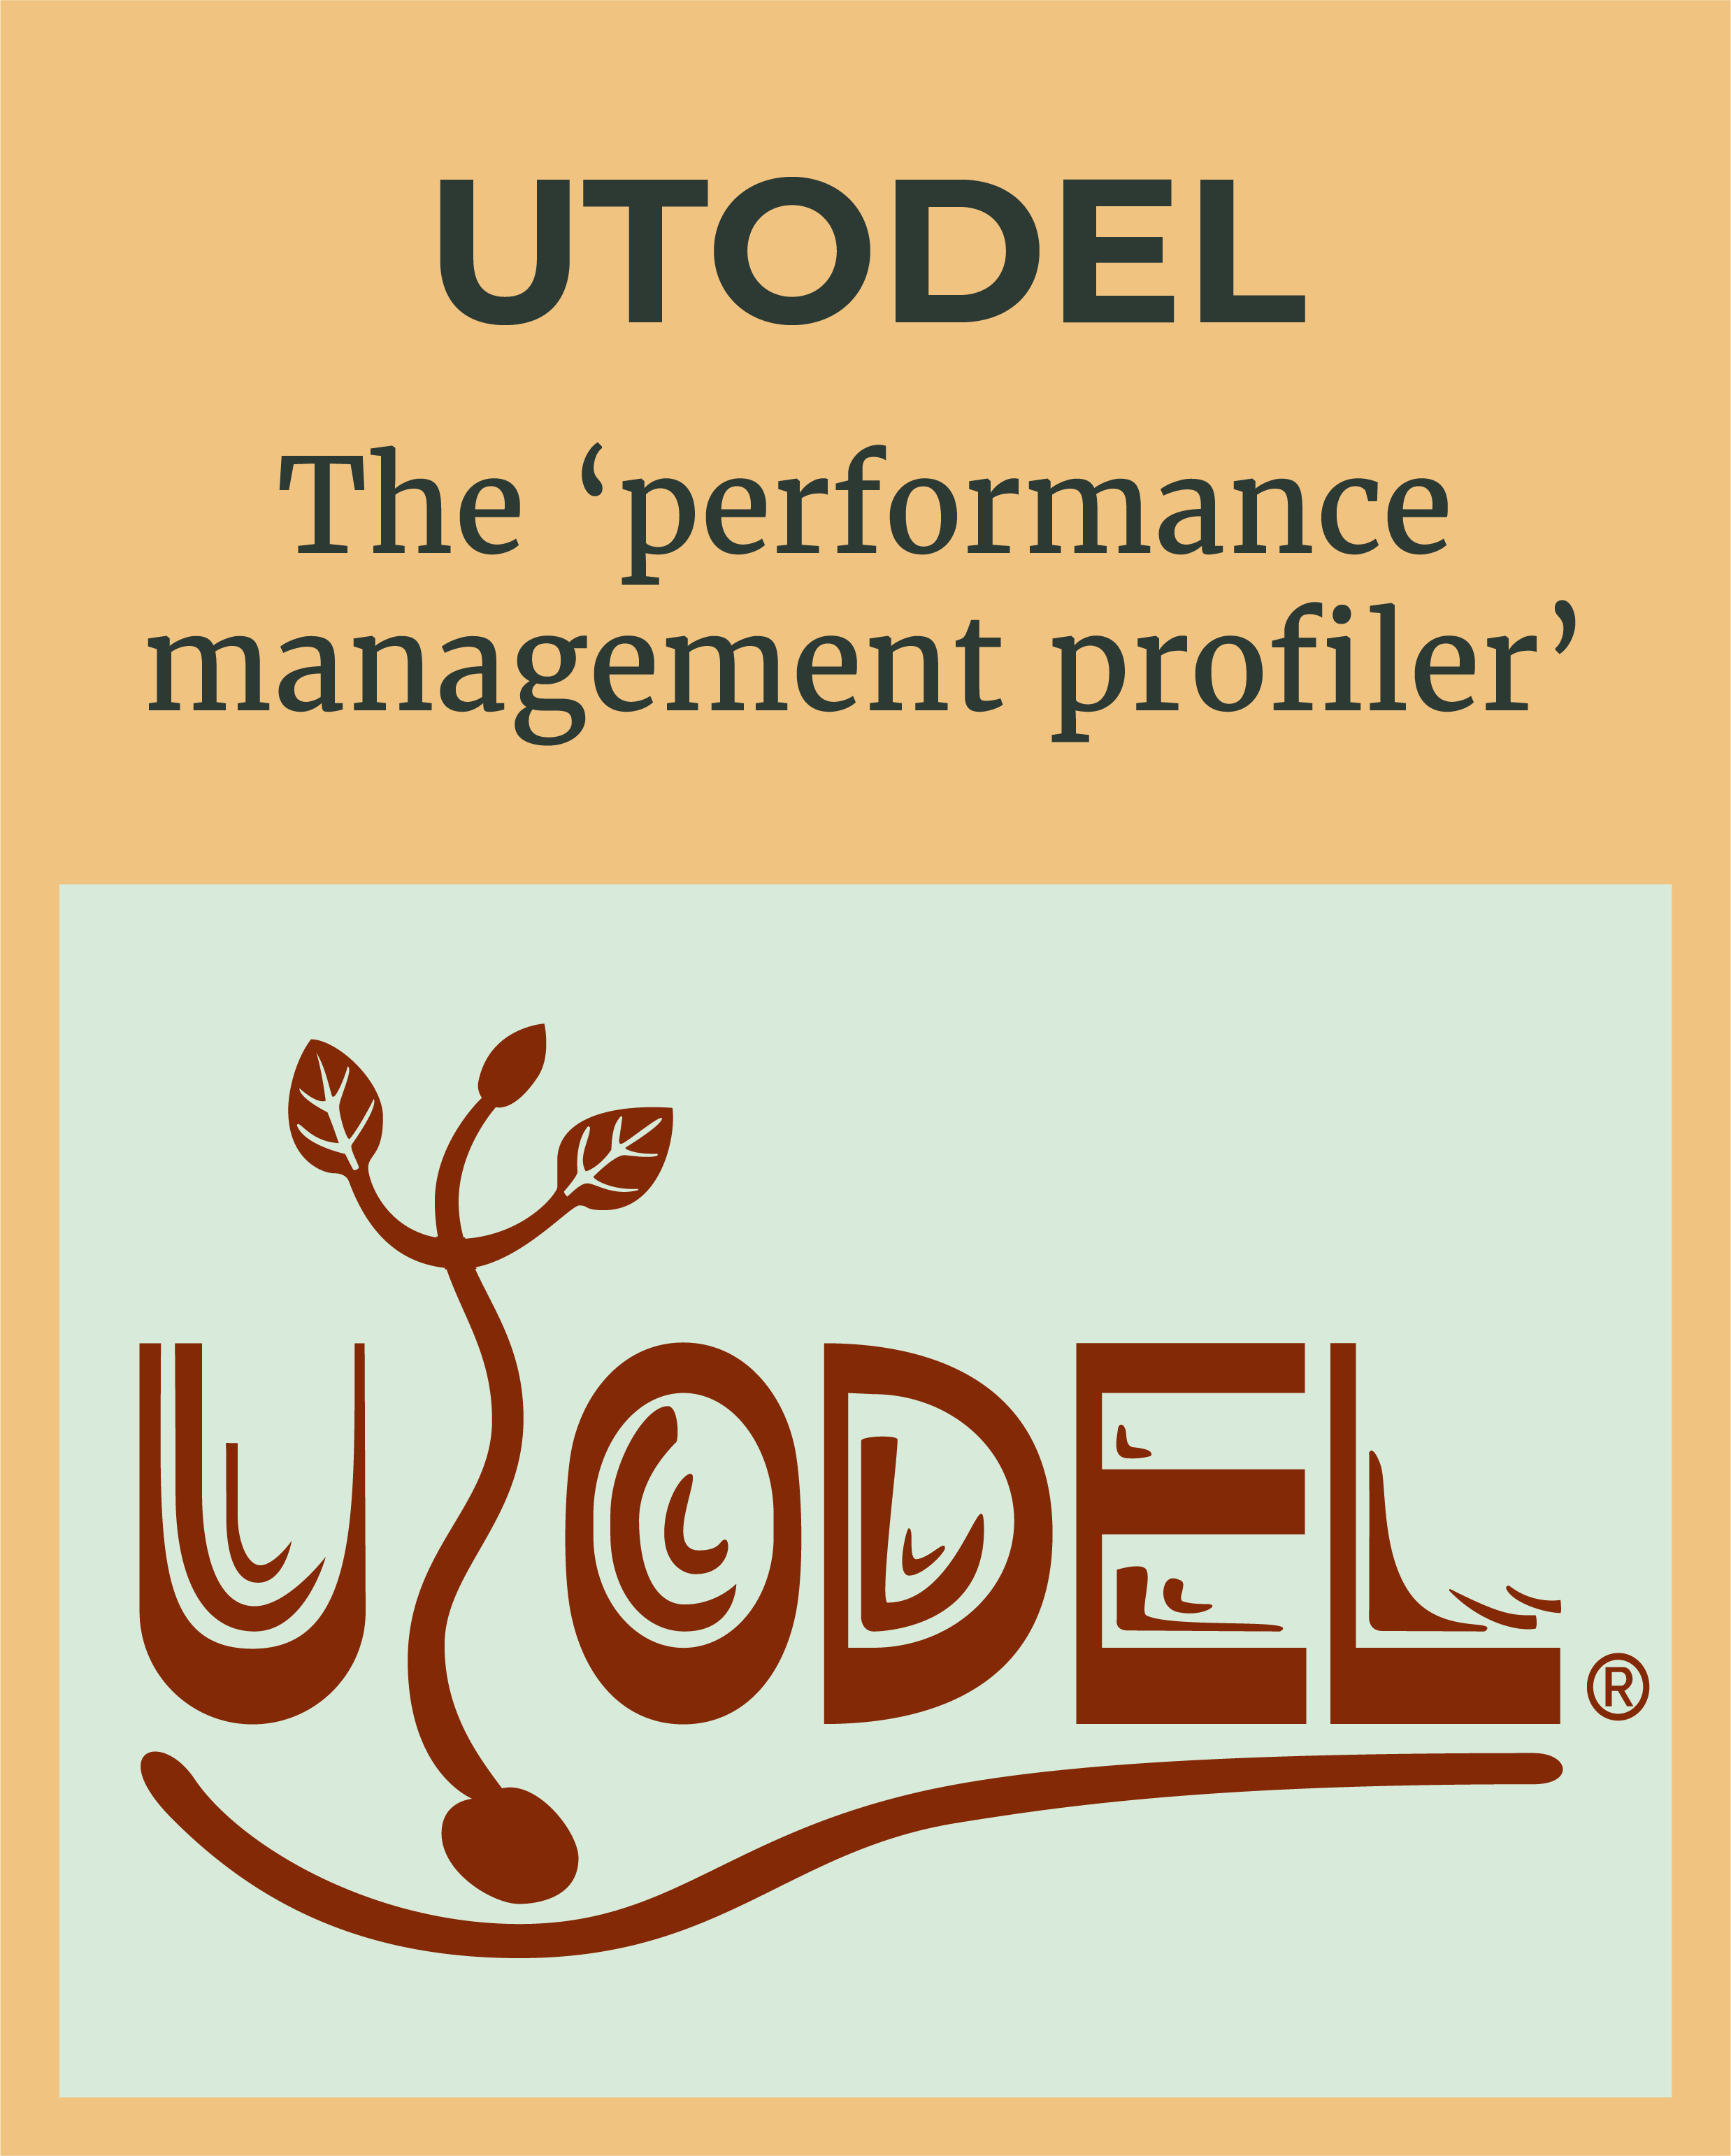 Logo of UTODEL - the research product that is the 'performance management profiler'